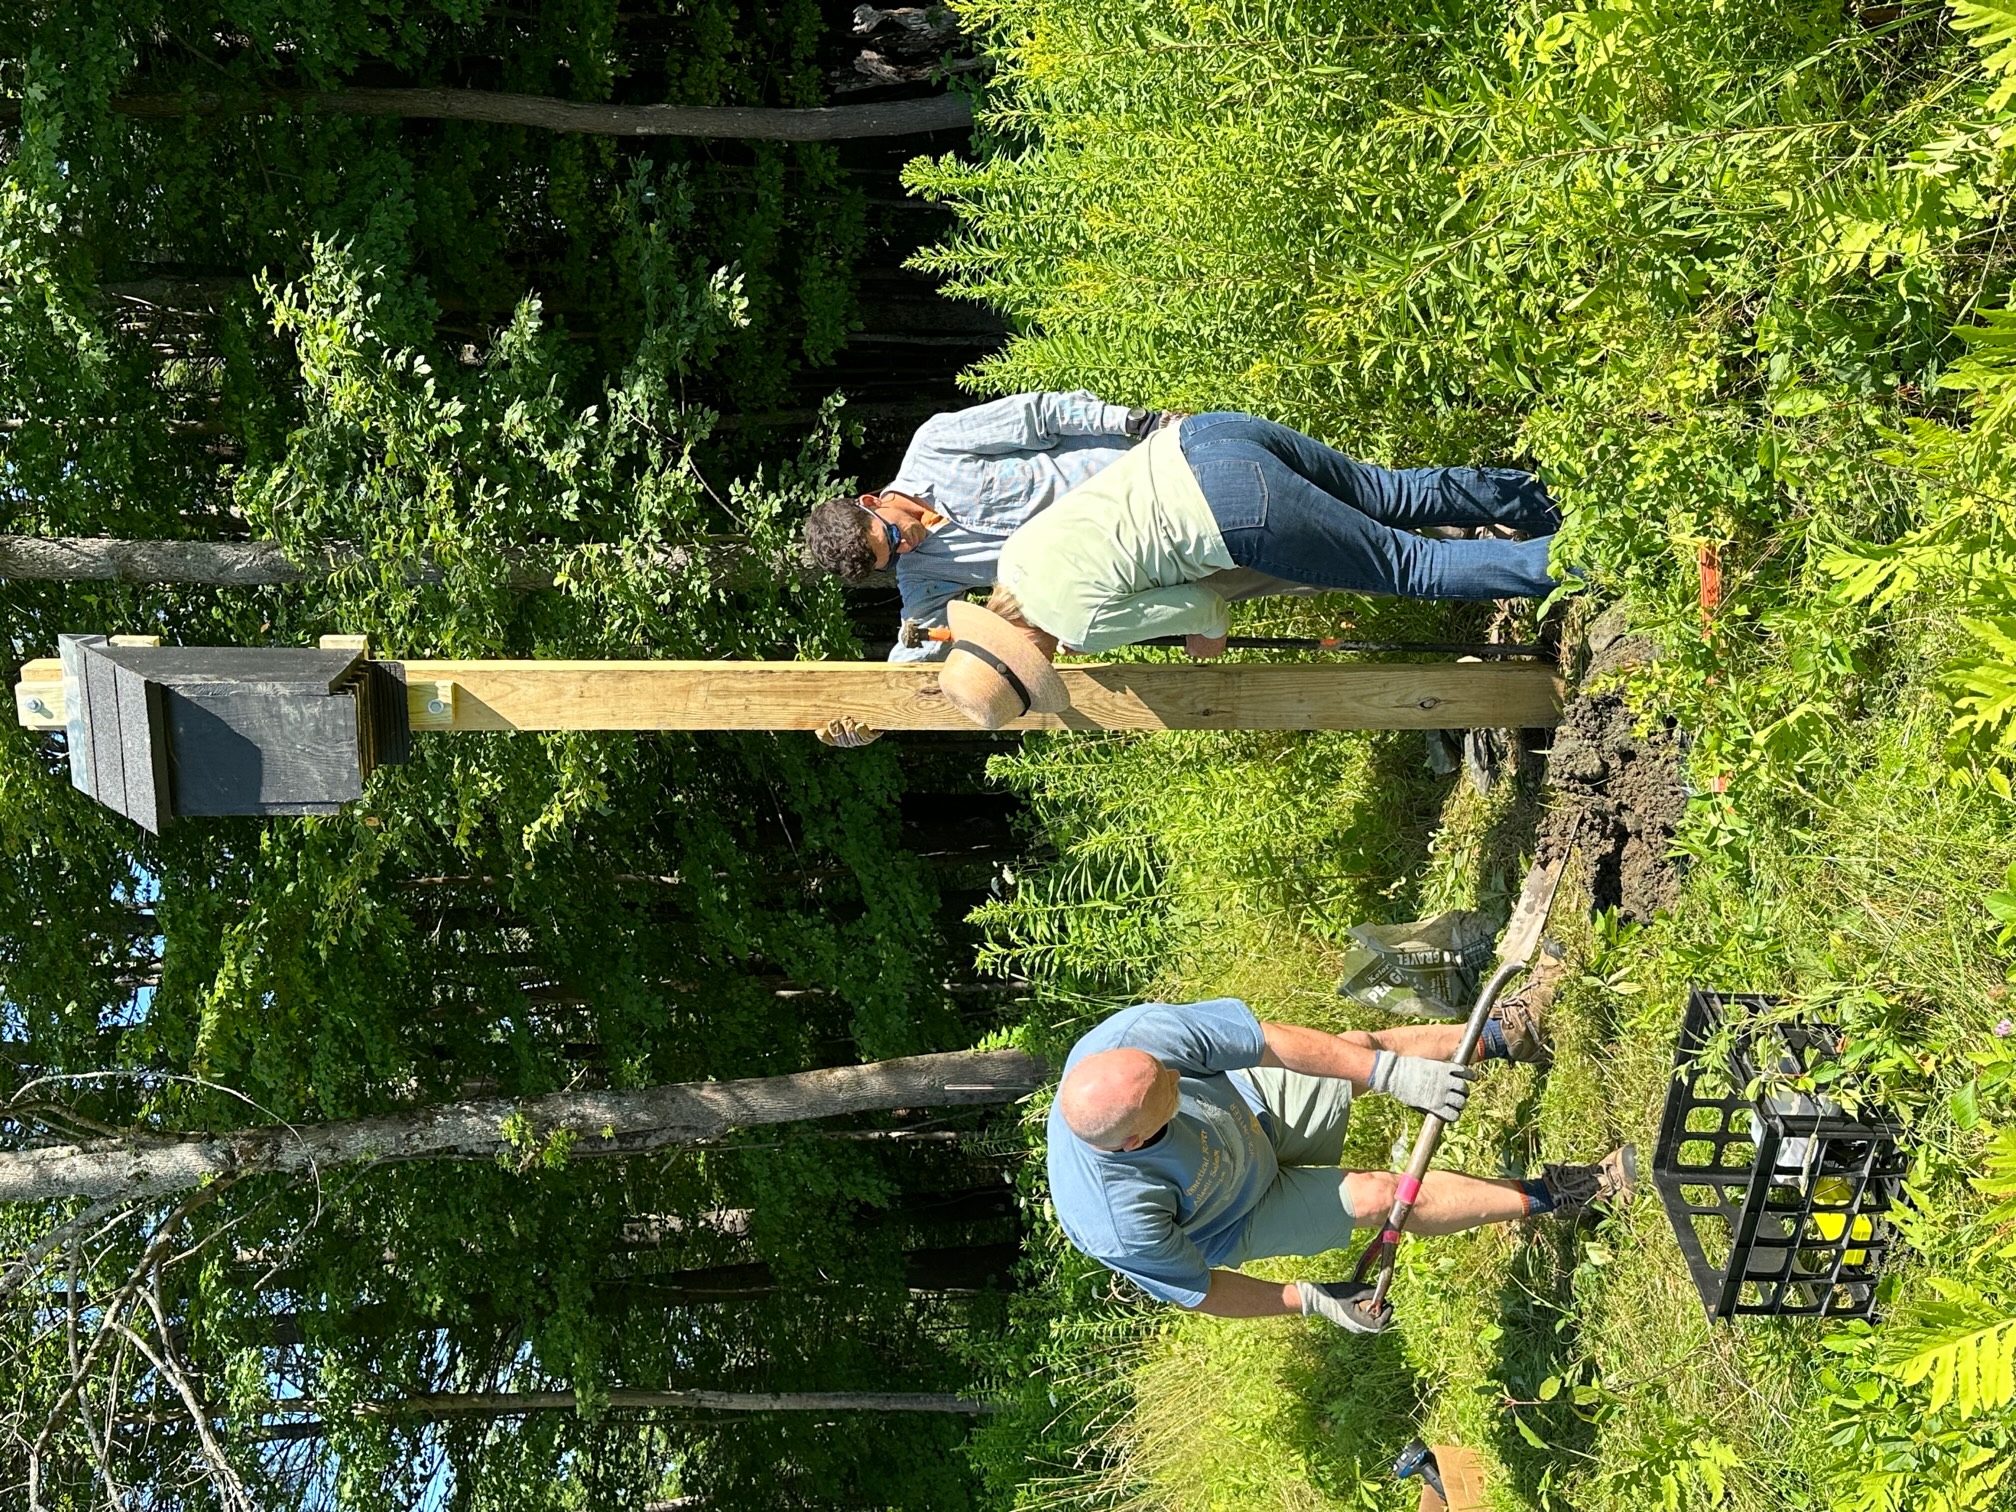 The first bat box mounted at Milt Frye.